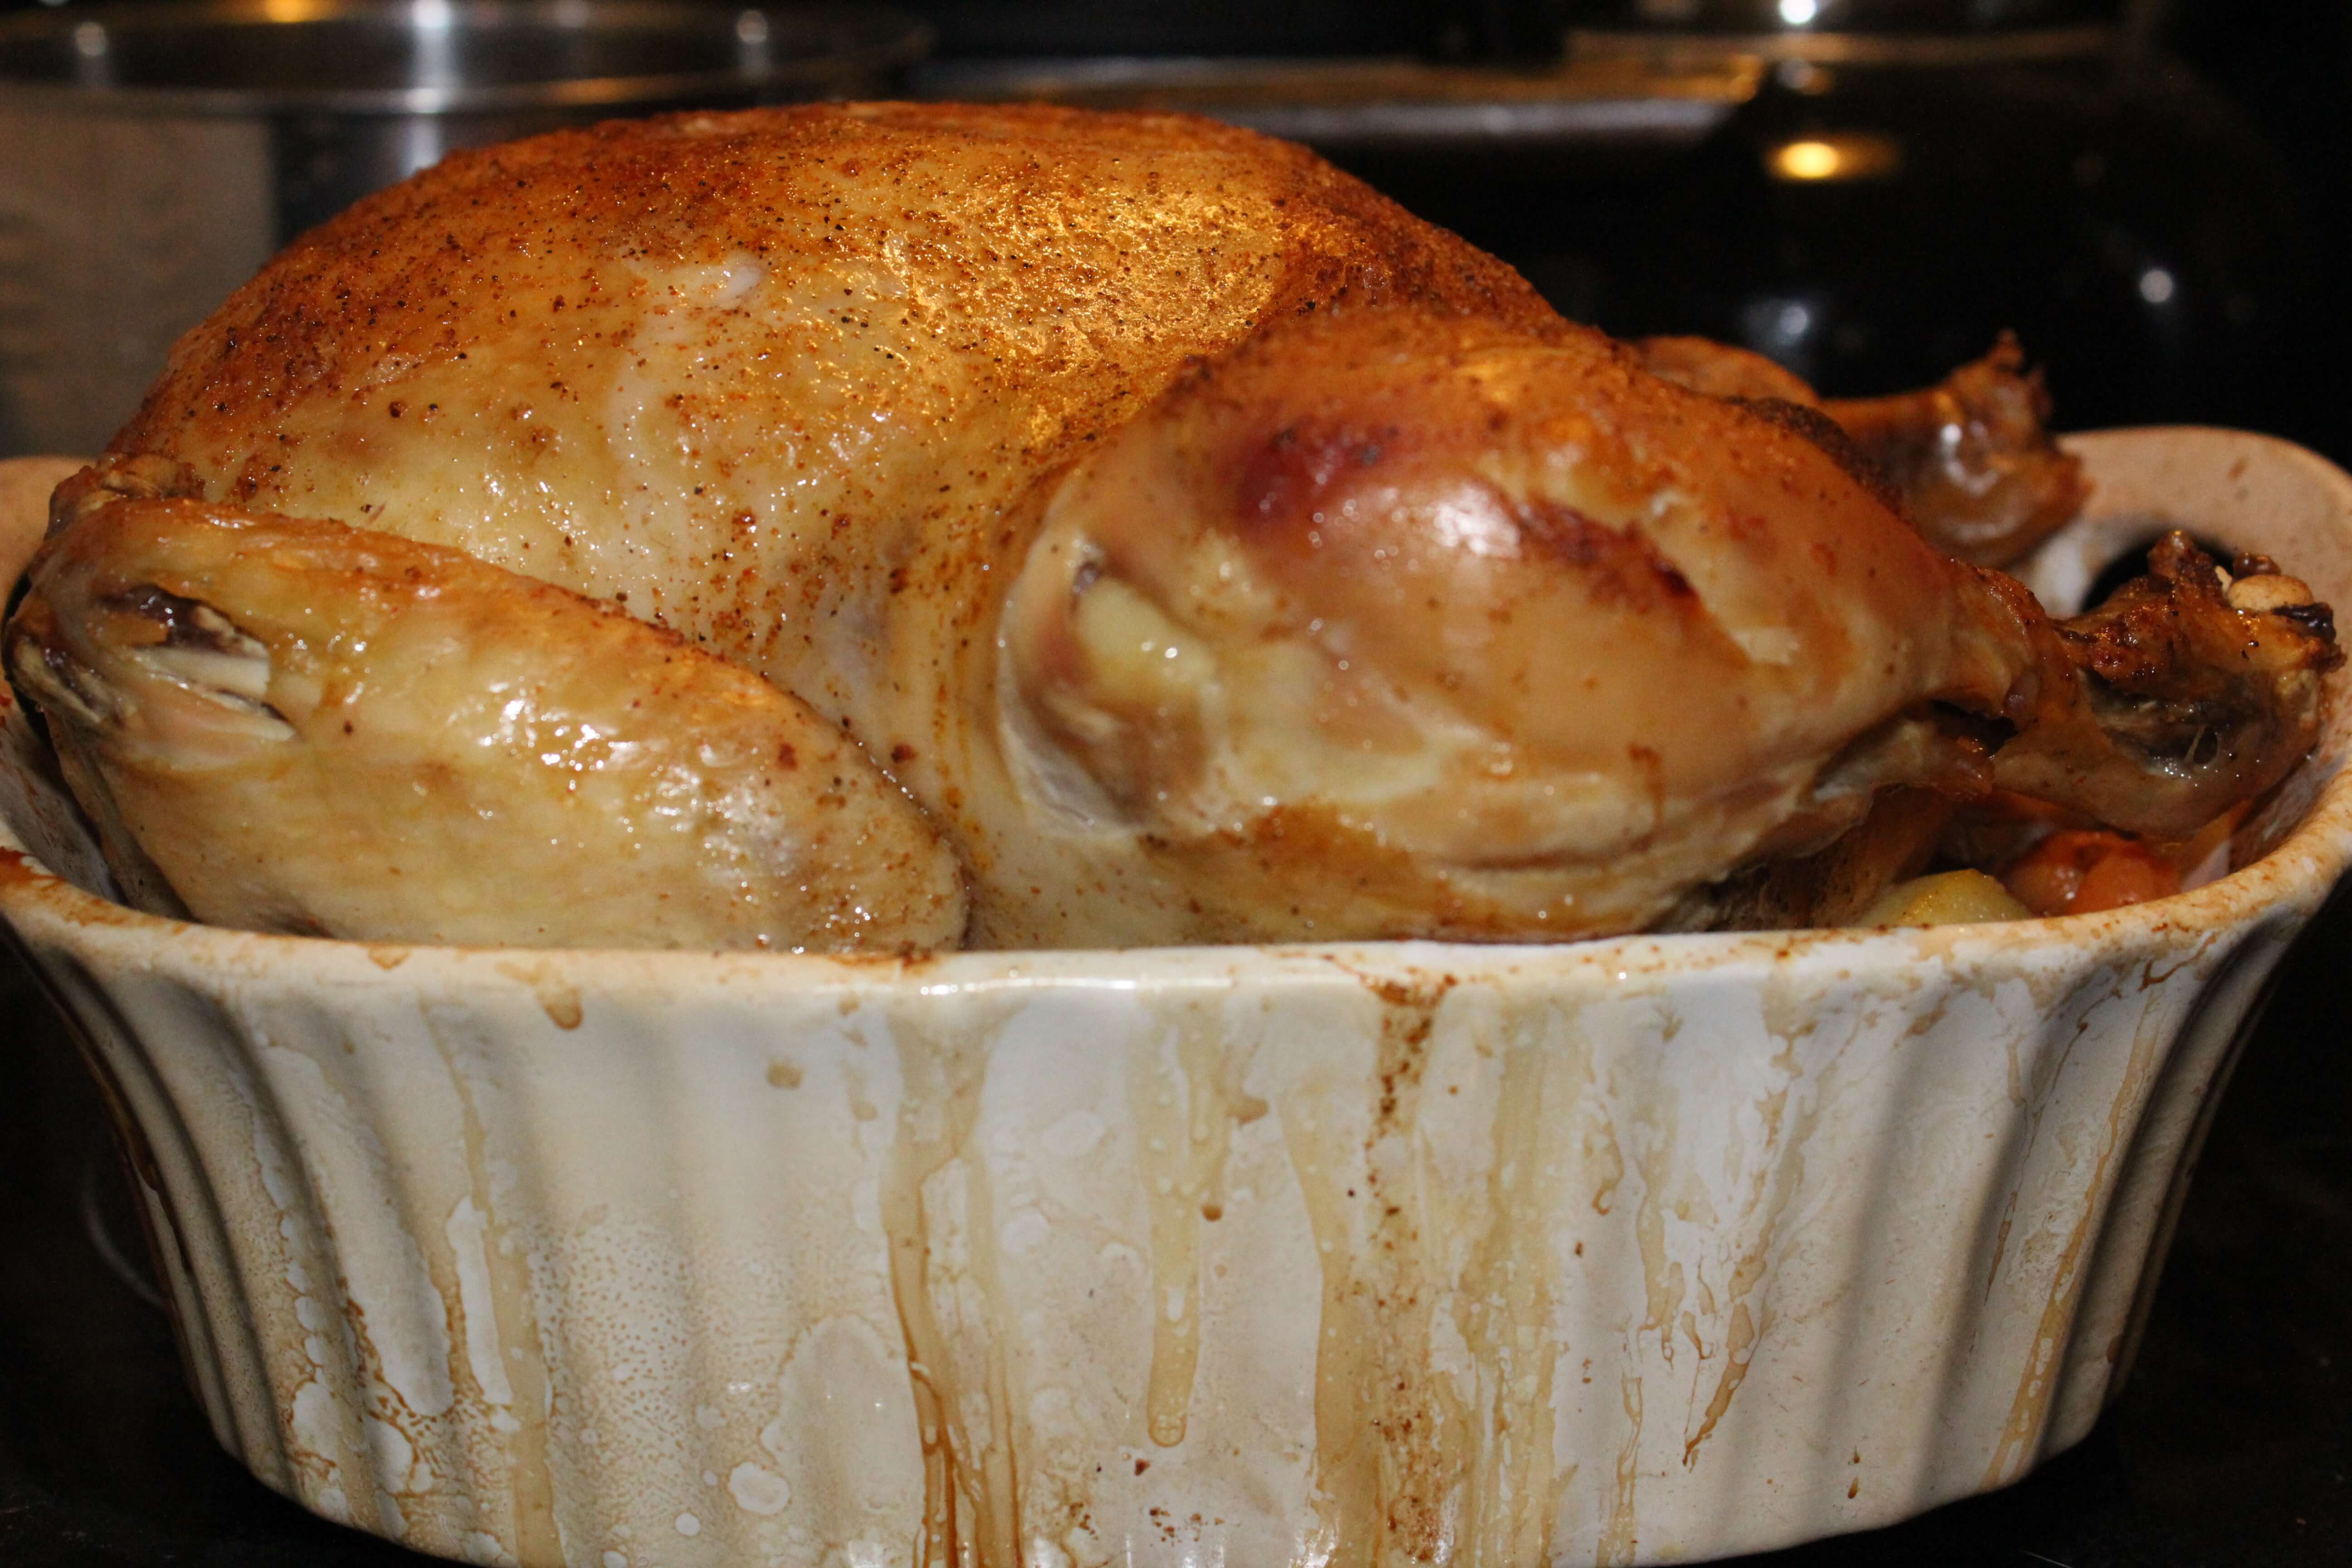 Have you tried this garlic stuffed baked chicken?